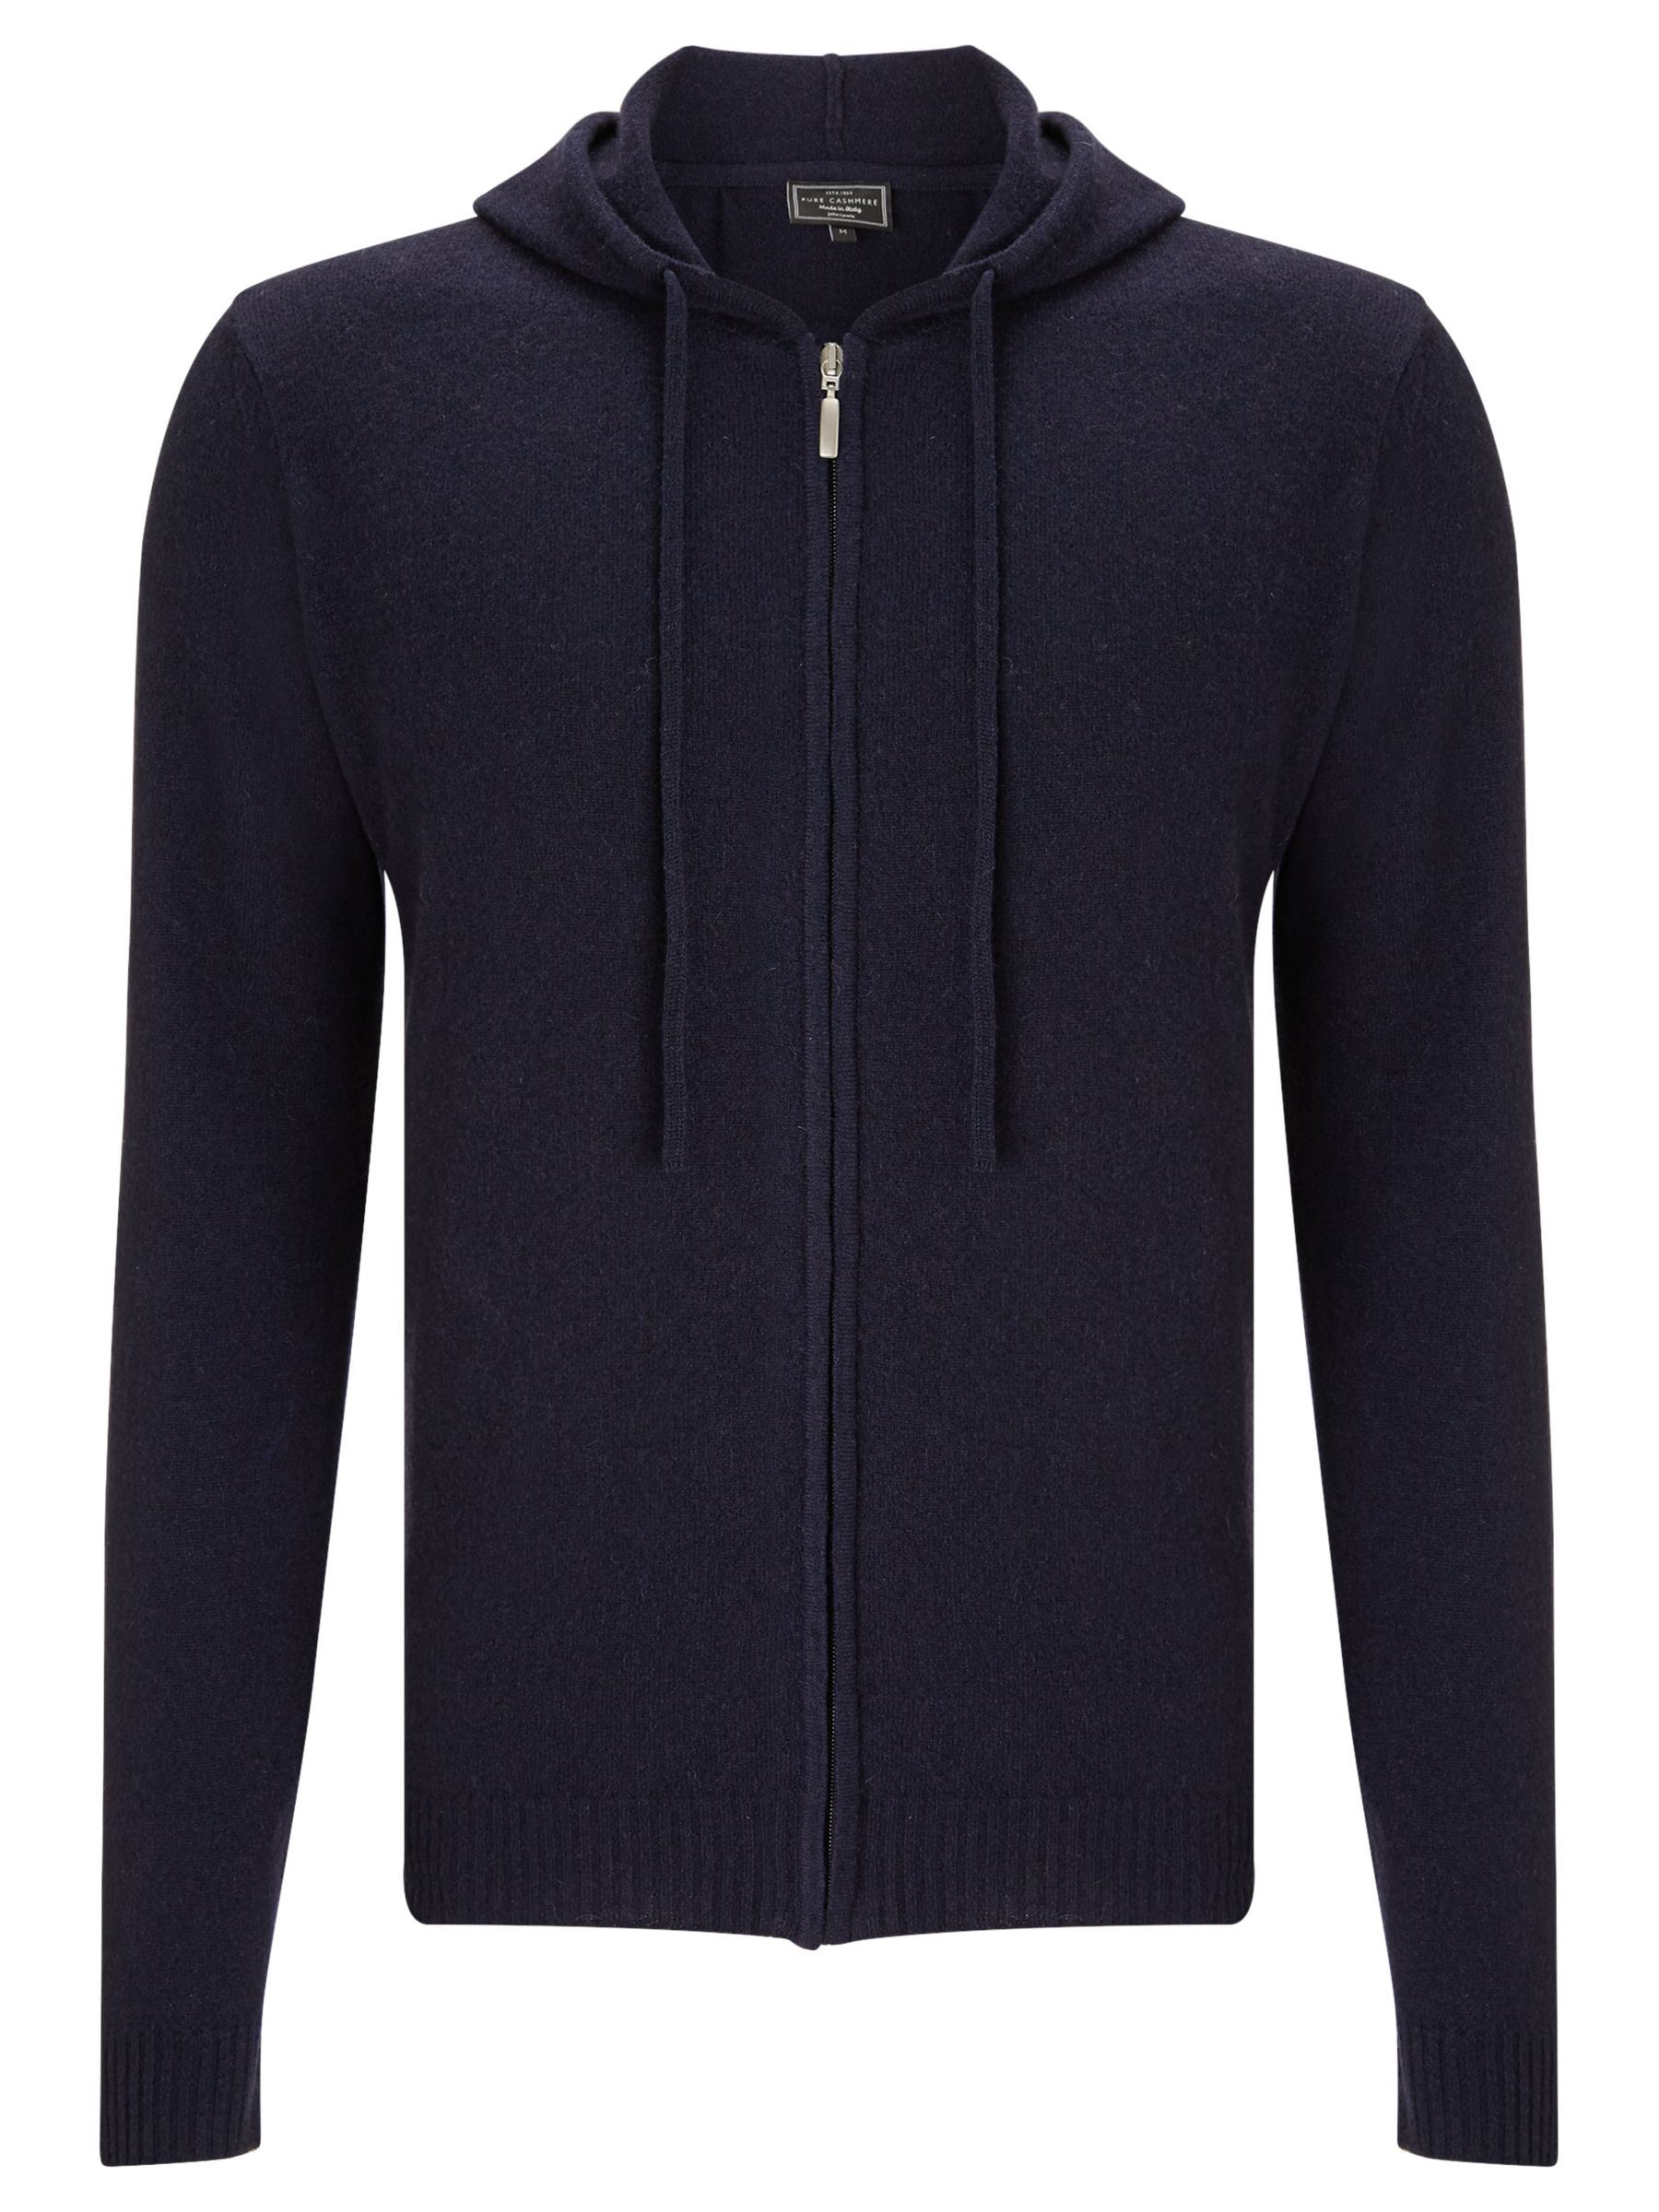 John Lewis & Partners Made in Italy Cashmere Full Zip Hoodie